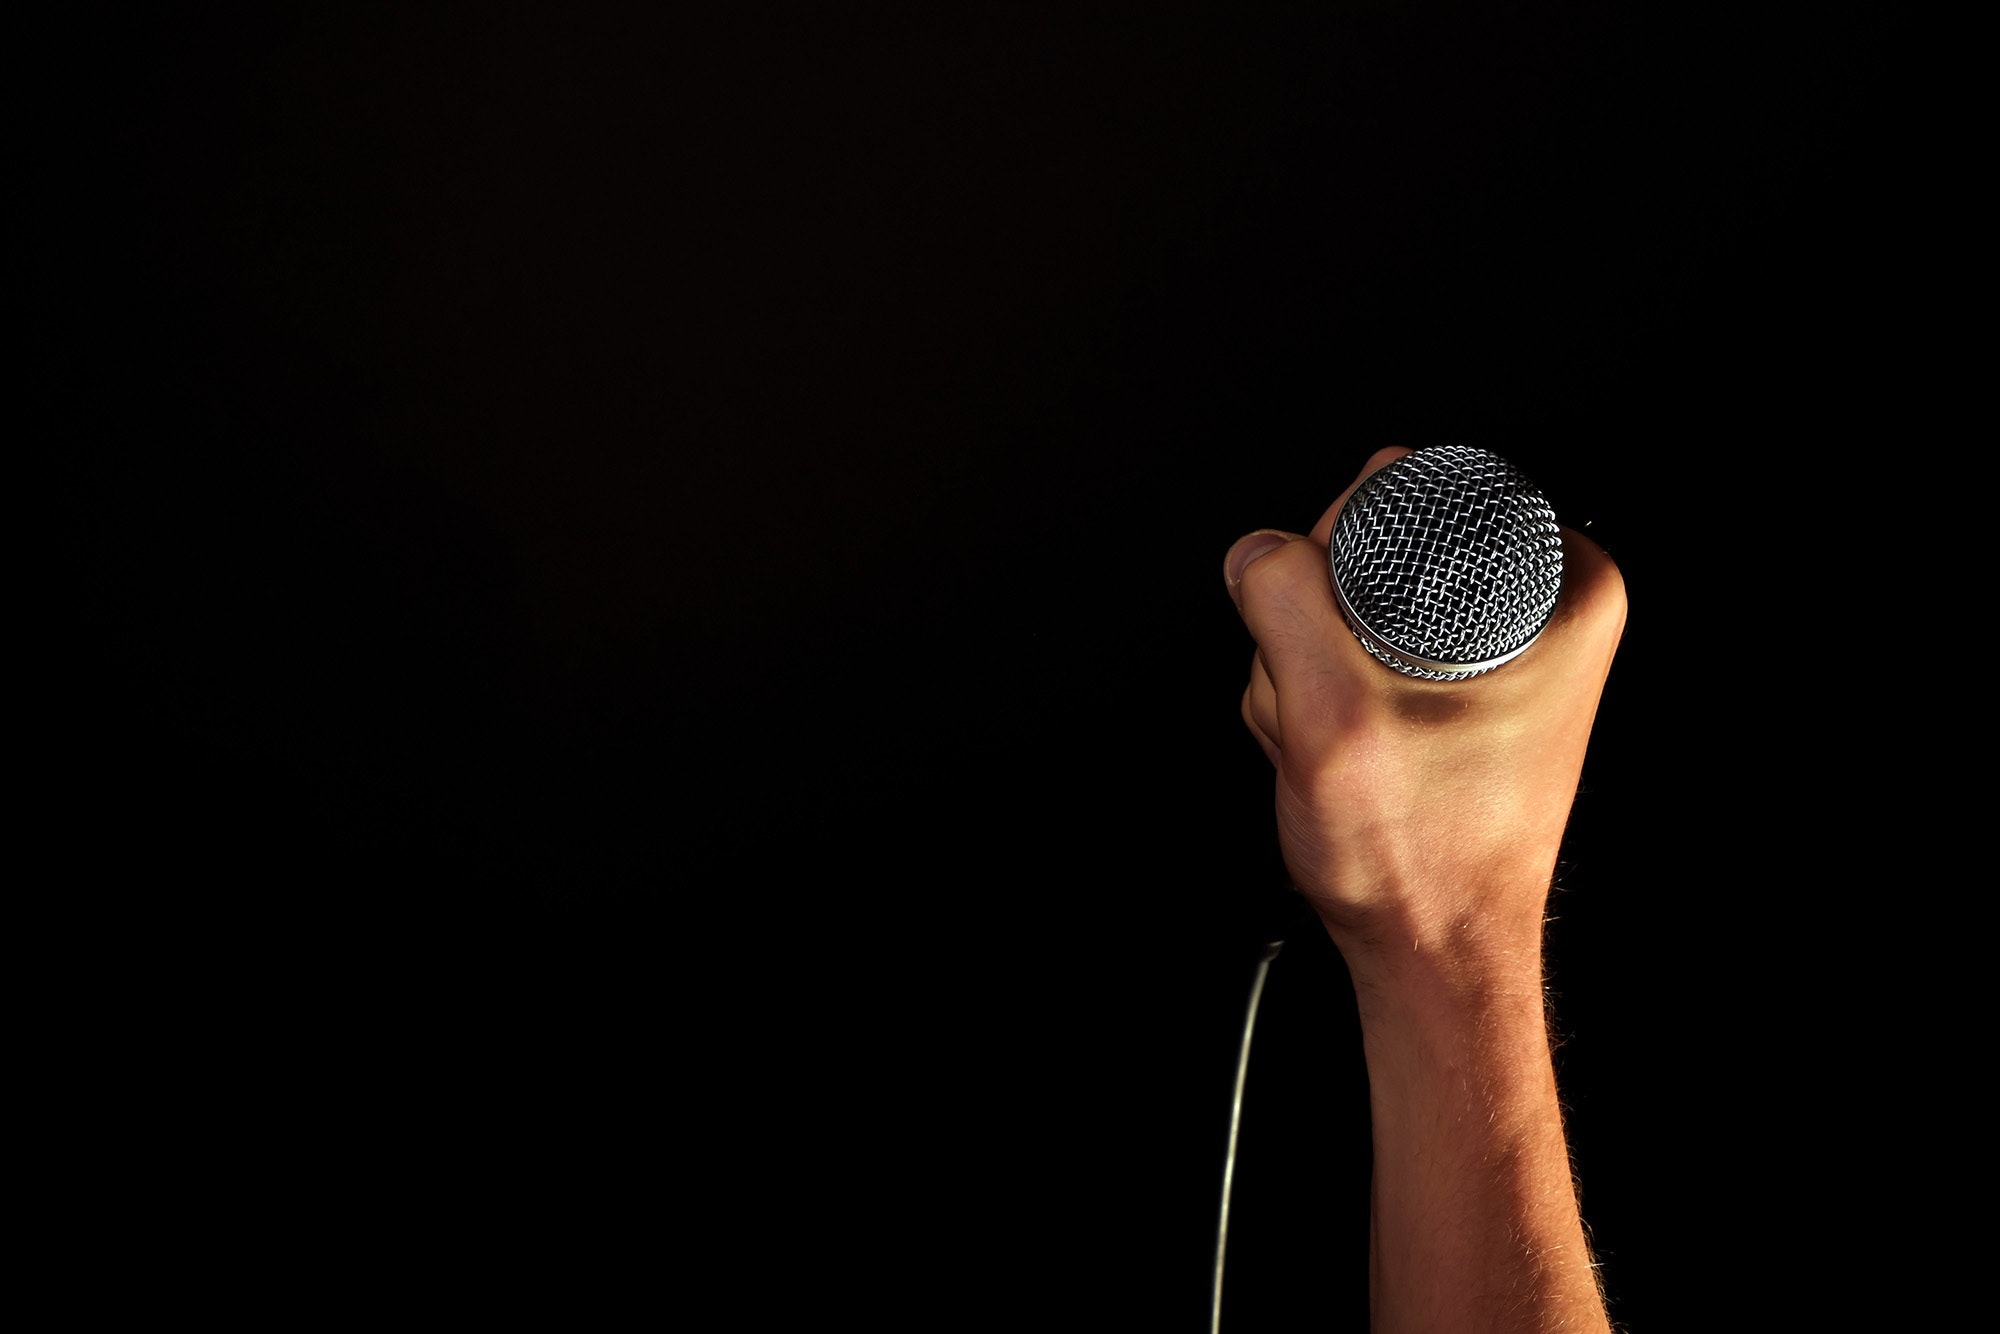 The man snatched the microphone from the religious preacher, before telling them to keep quiet. Image credit: Pixabay via Pexels